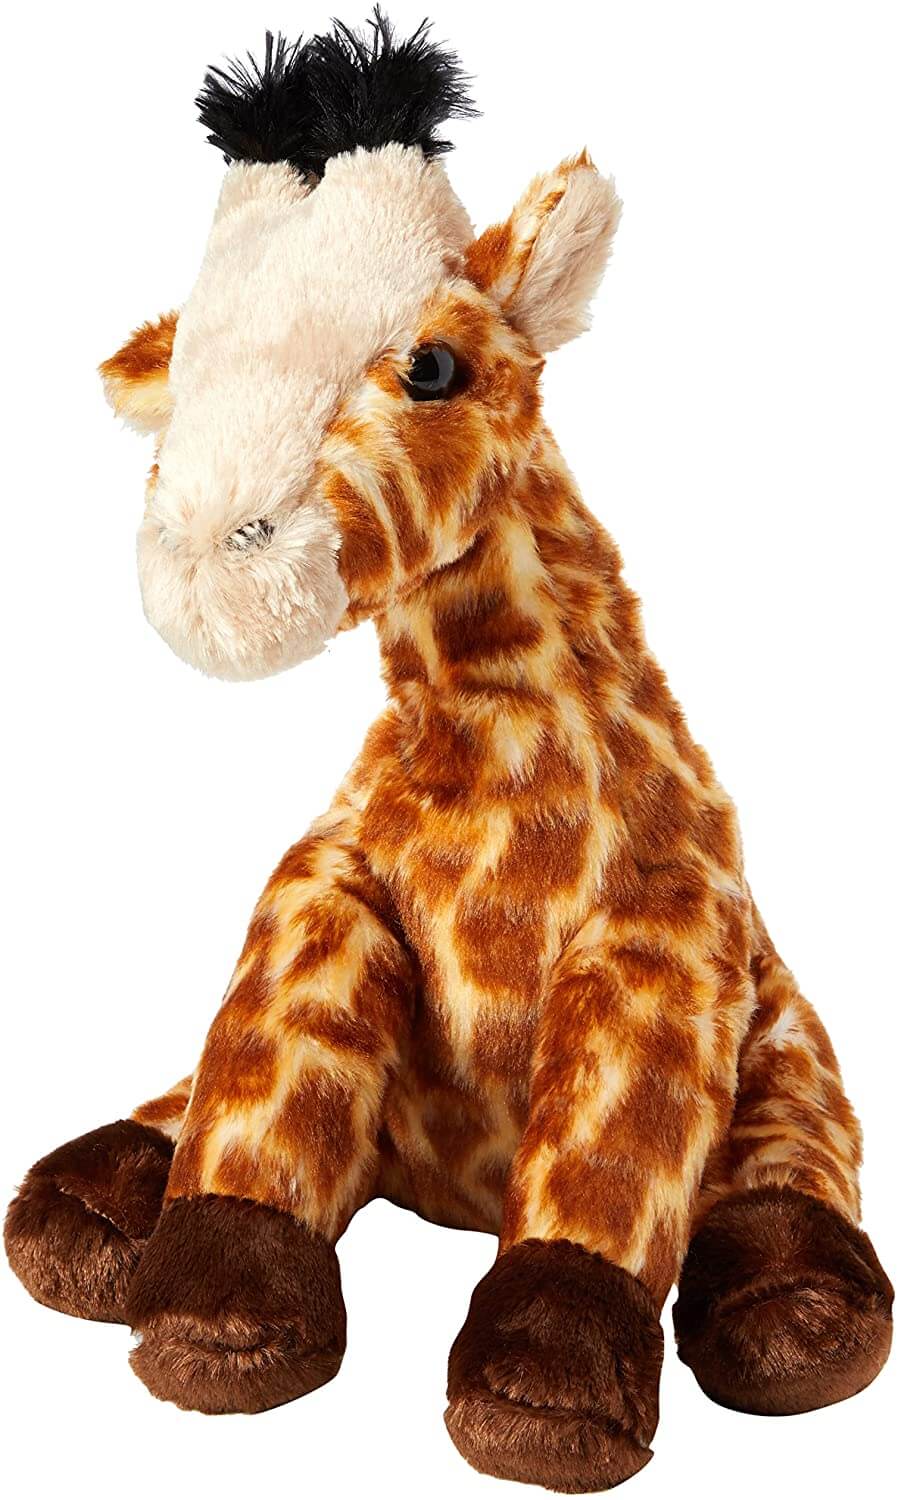 Soft toys for toddlers - giraffe toy - aurora soft toys at The Toy Room